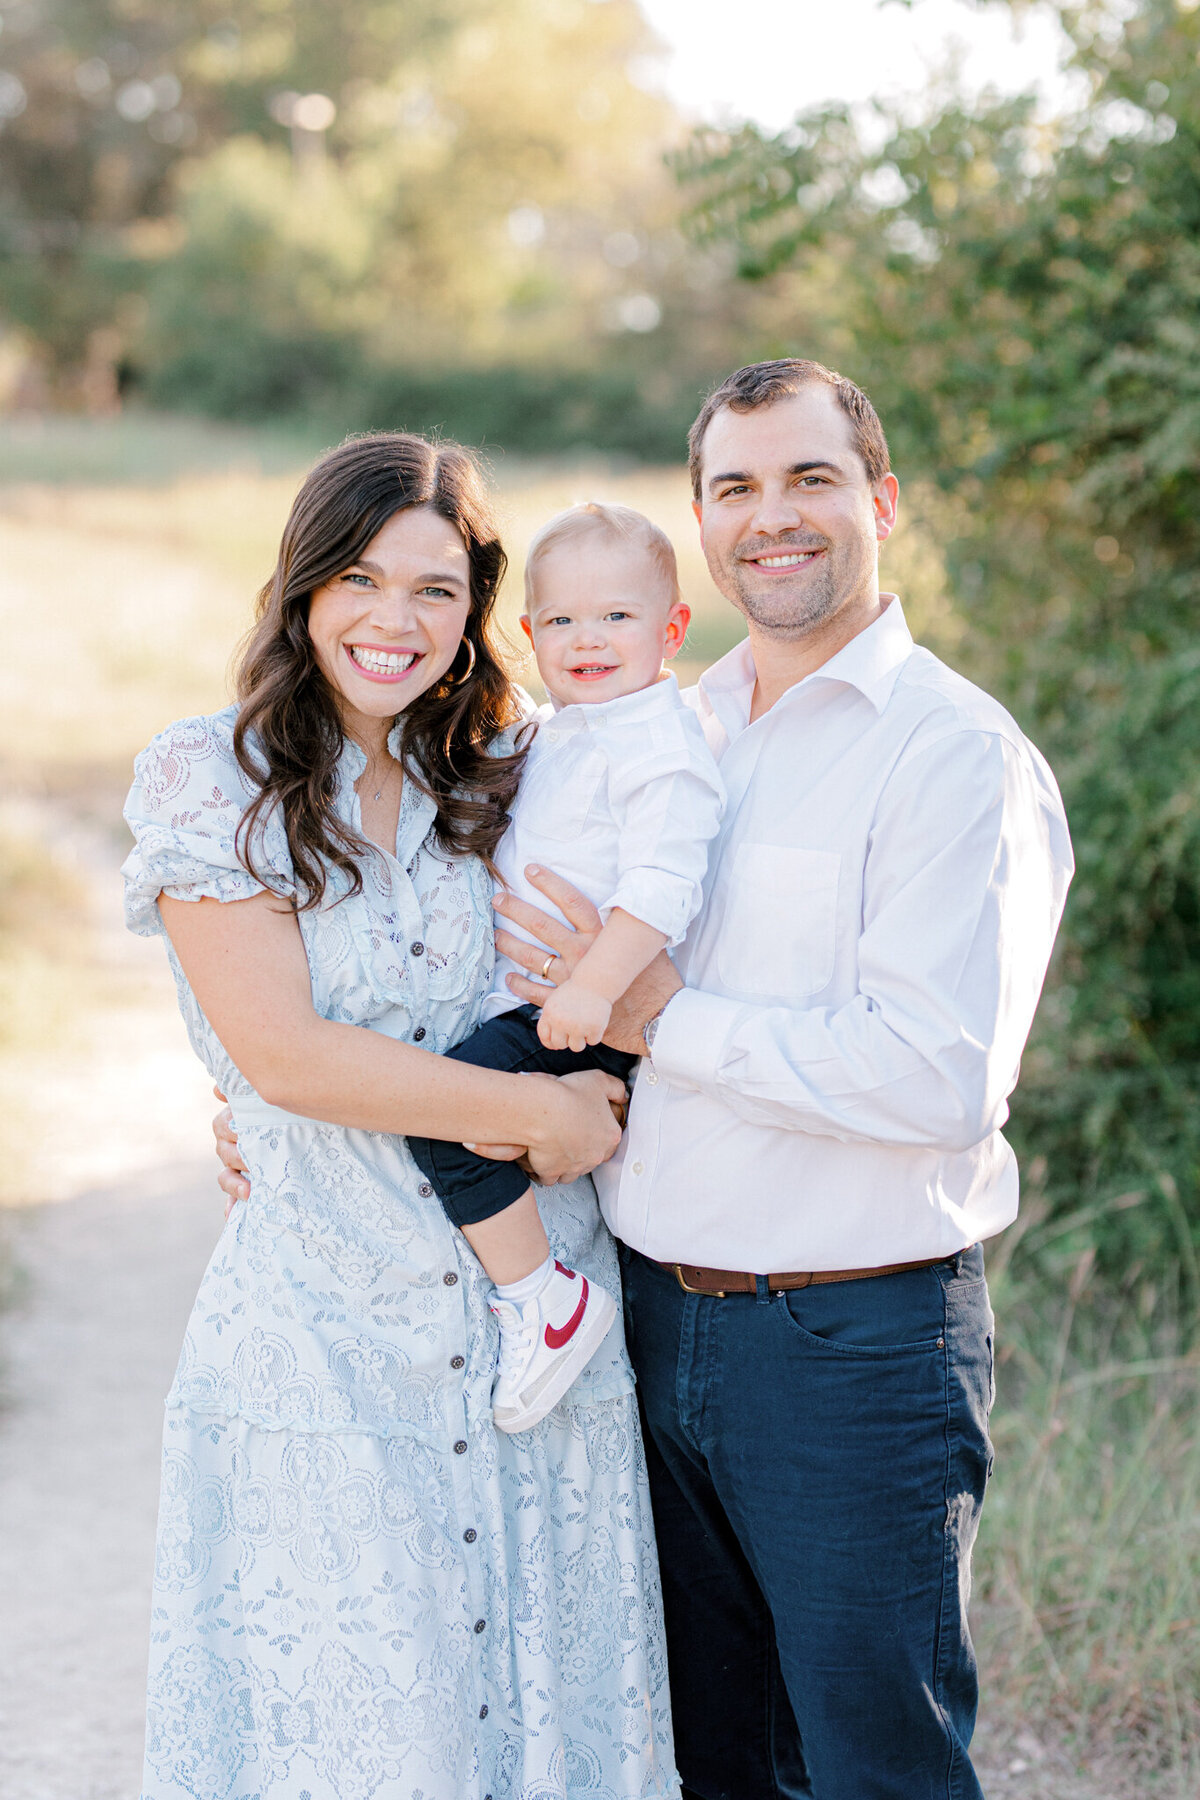 Fall Mini Sessions at Norbuck Park | Dallas Family Photographer | Sami Kathryn Photography | Oct 2022-5